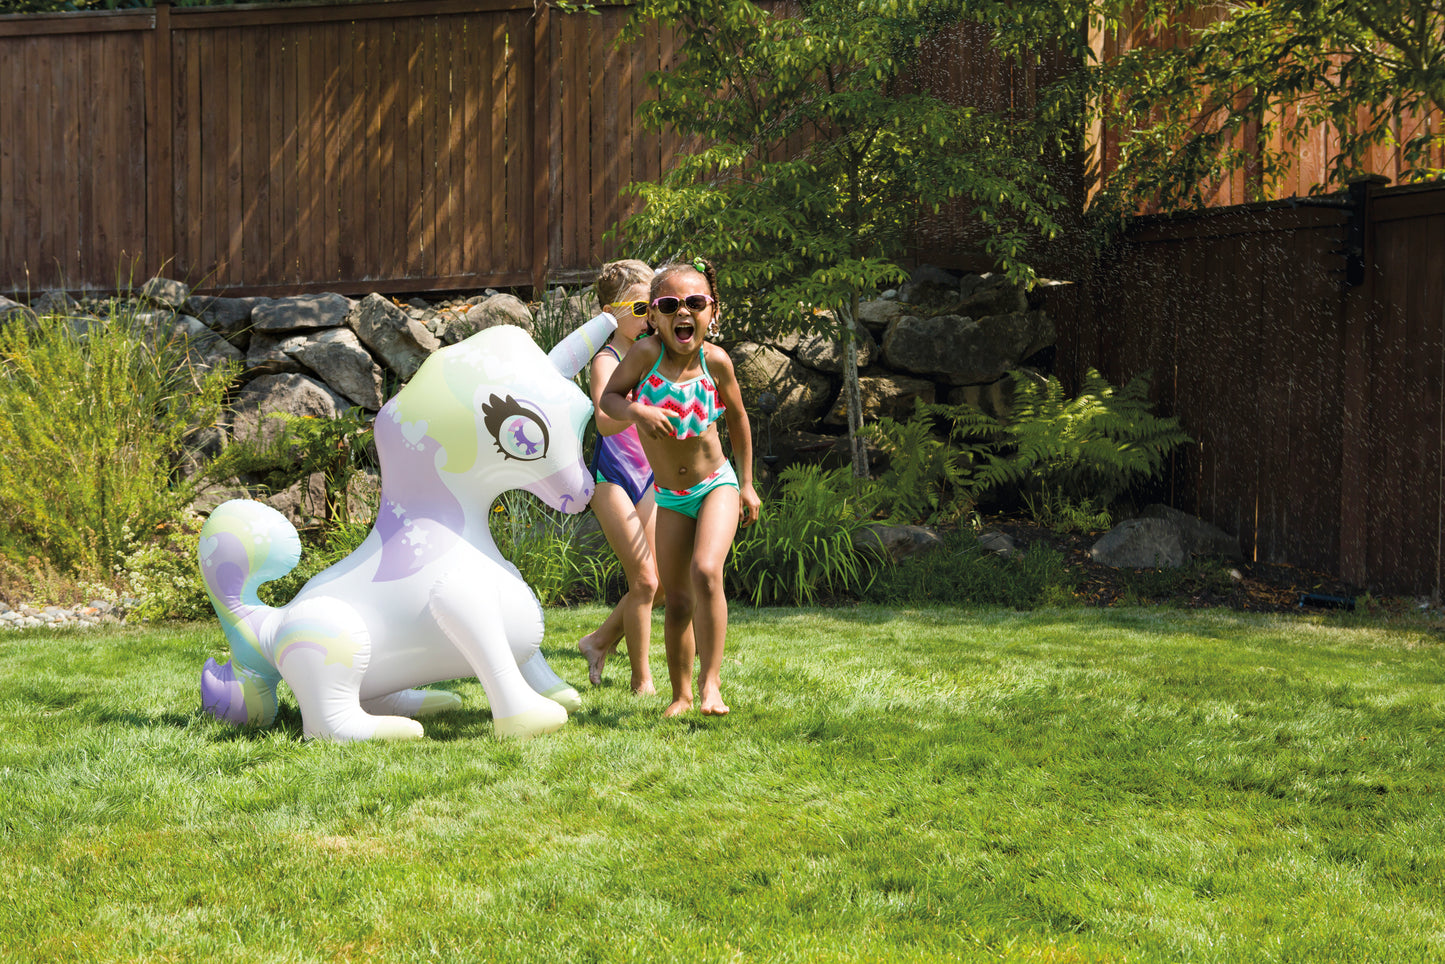 Children playing with inflatable unicorn Mist-Ical Uni Sprinkler